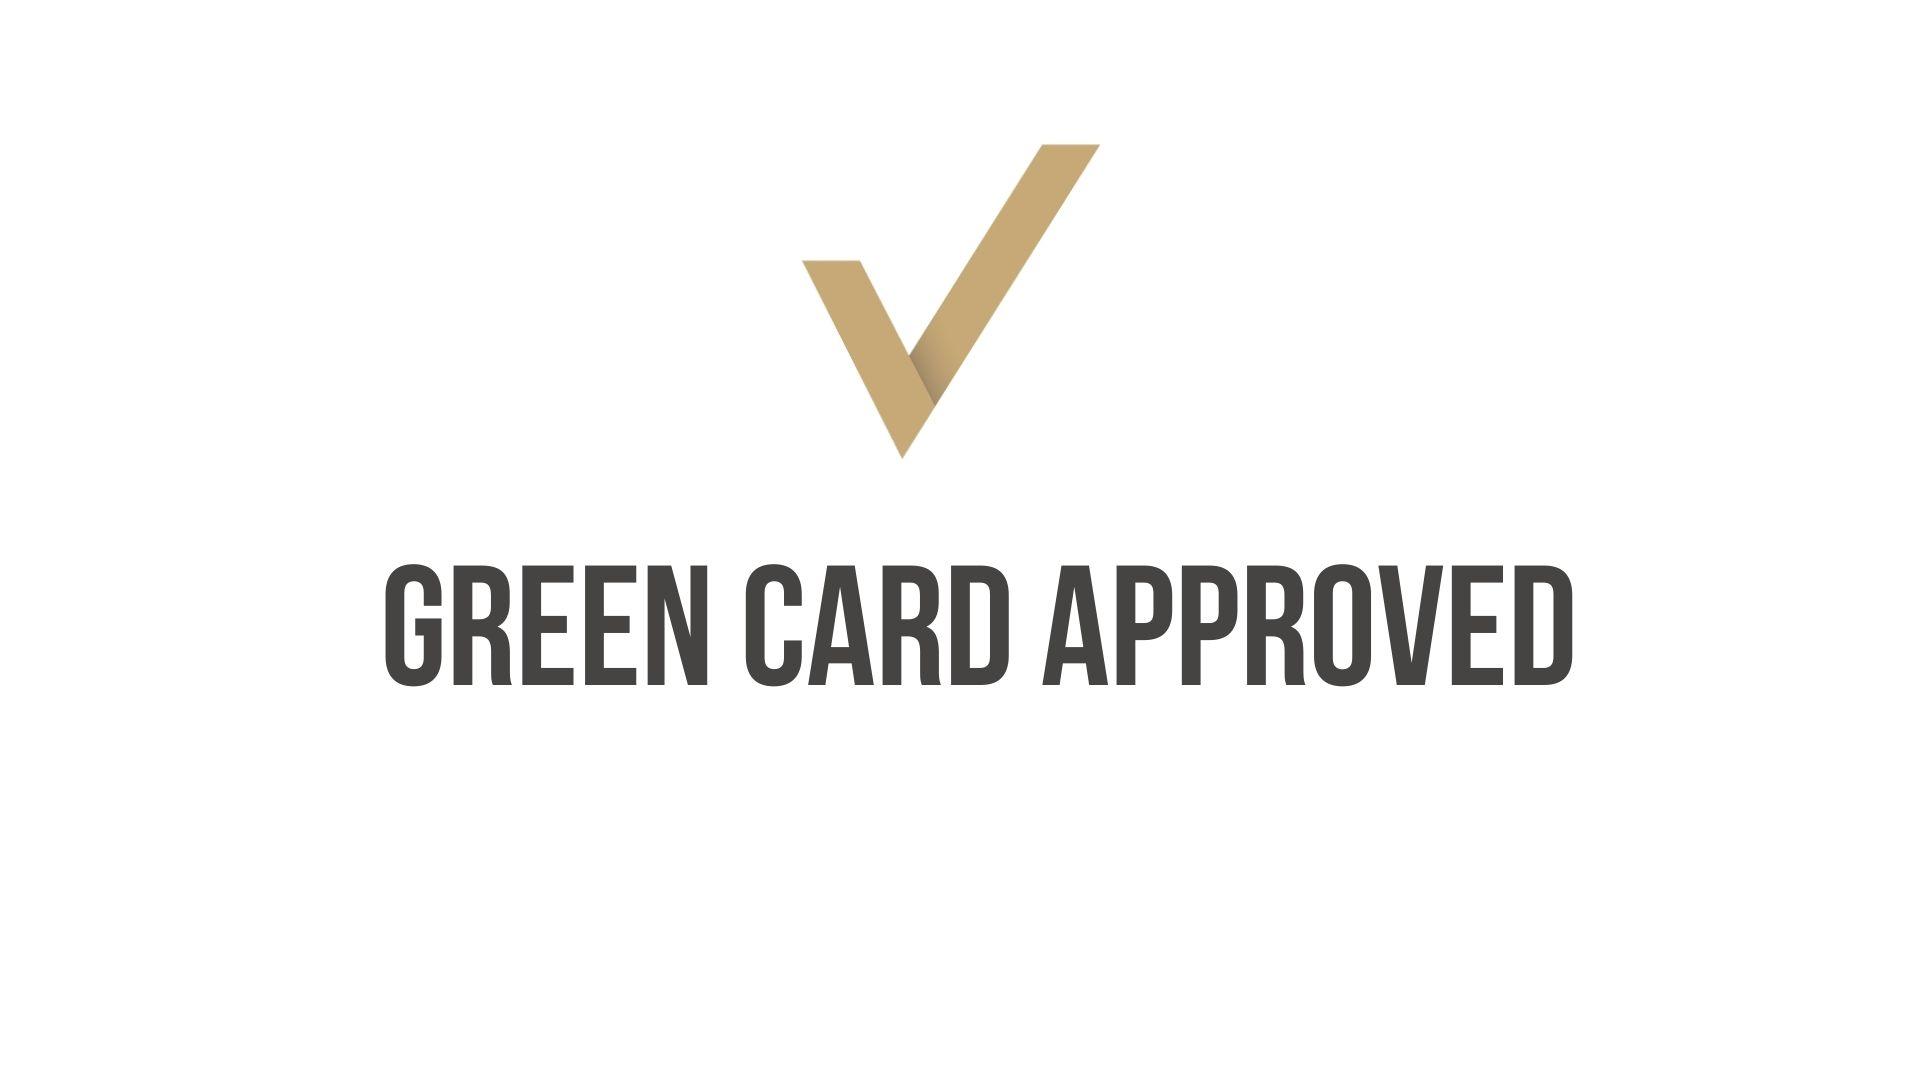 Fast Marriage-Based Green Card Approval (Approved in 87 Days)